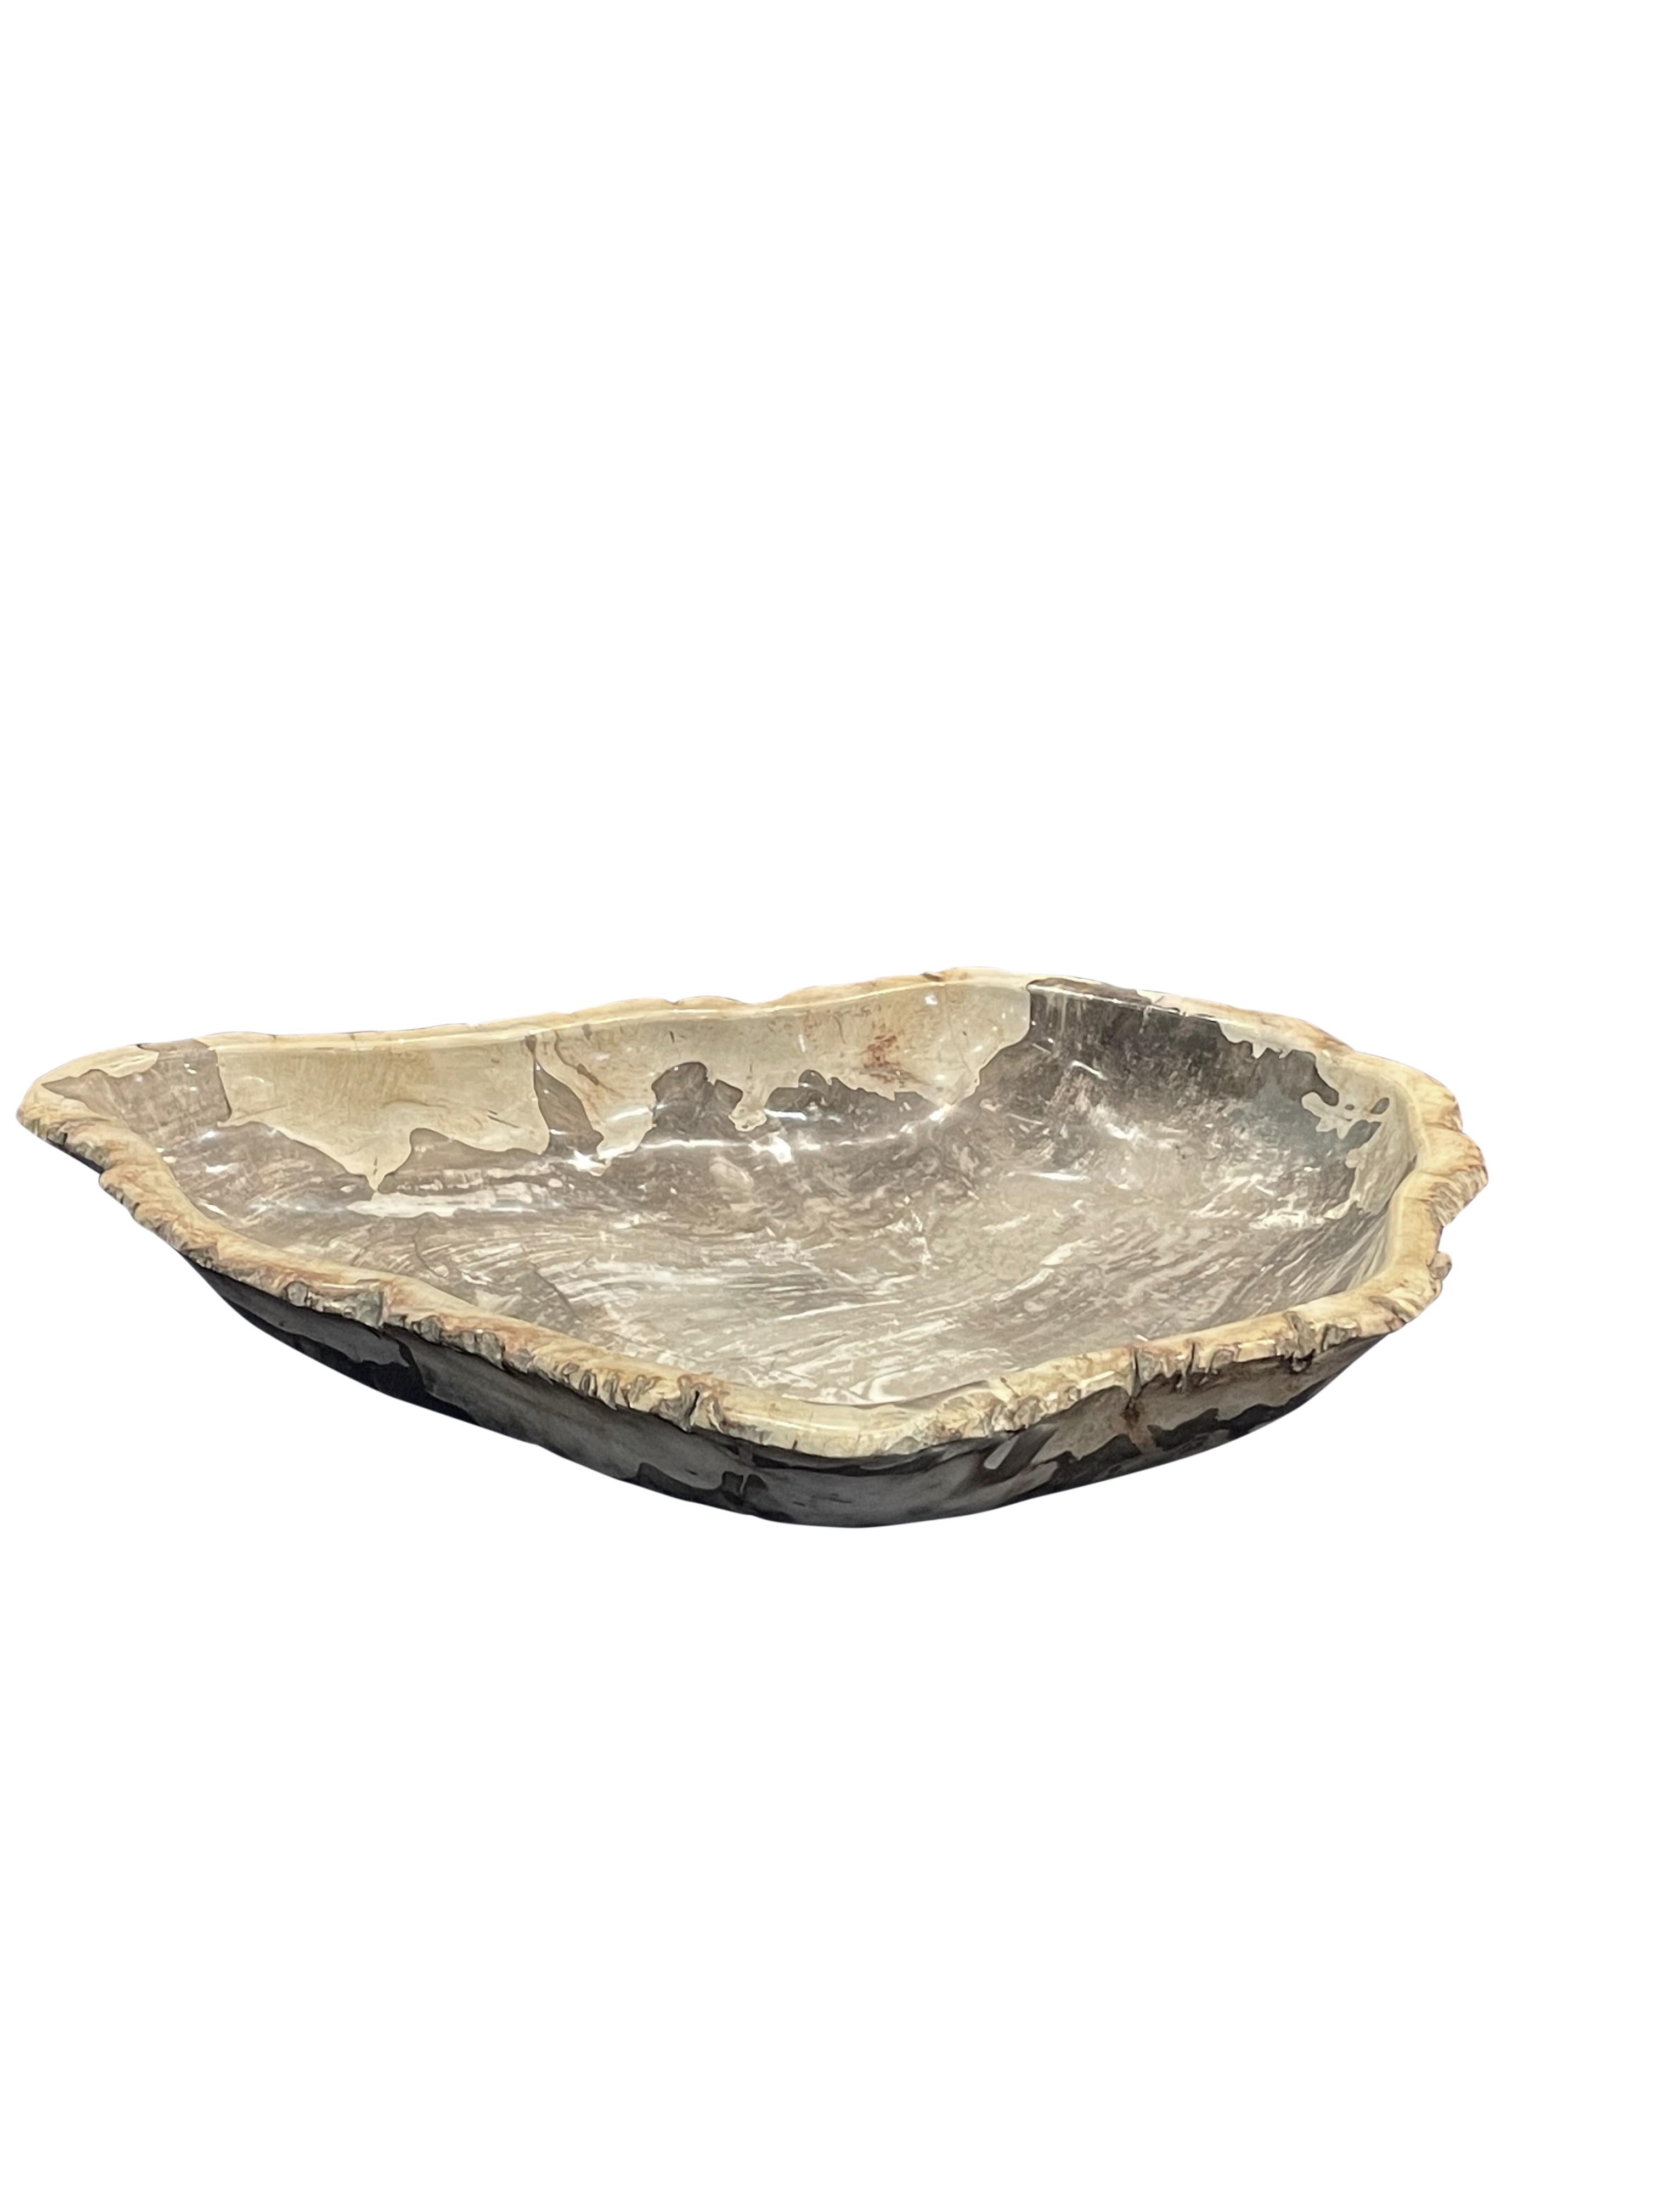 Contemporary Indonesian large petrified wood bowl.
Taupe in color.
From a collection of petrified wood bowls and platters.
